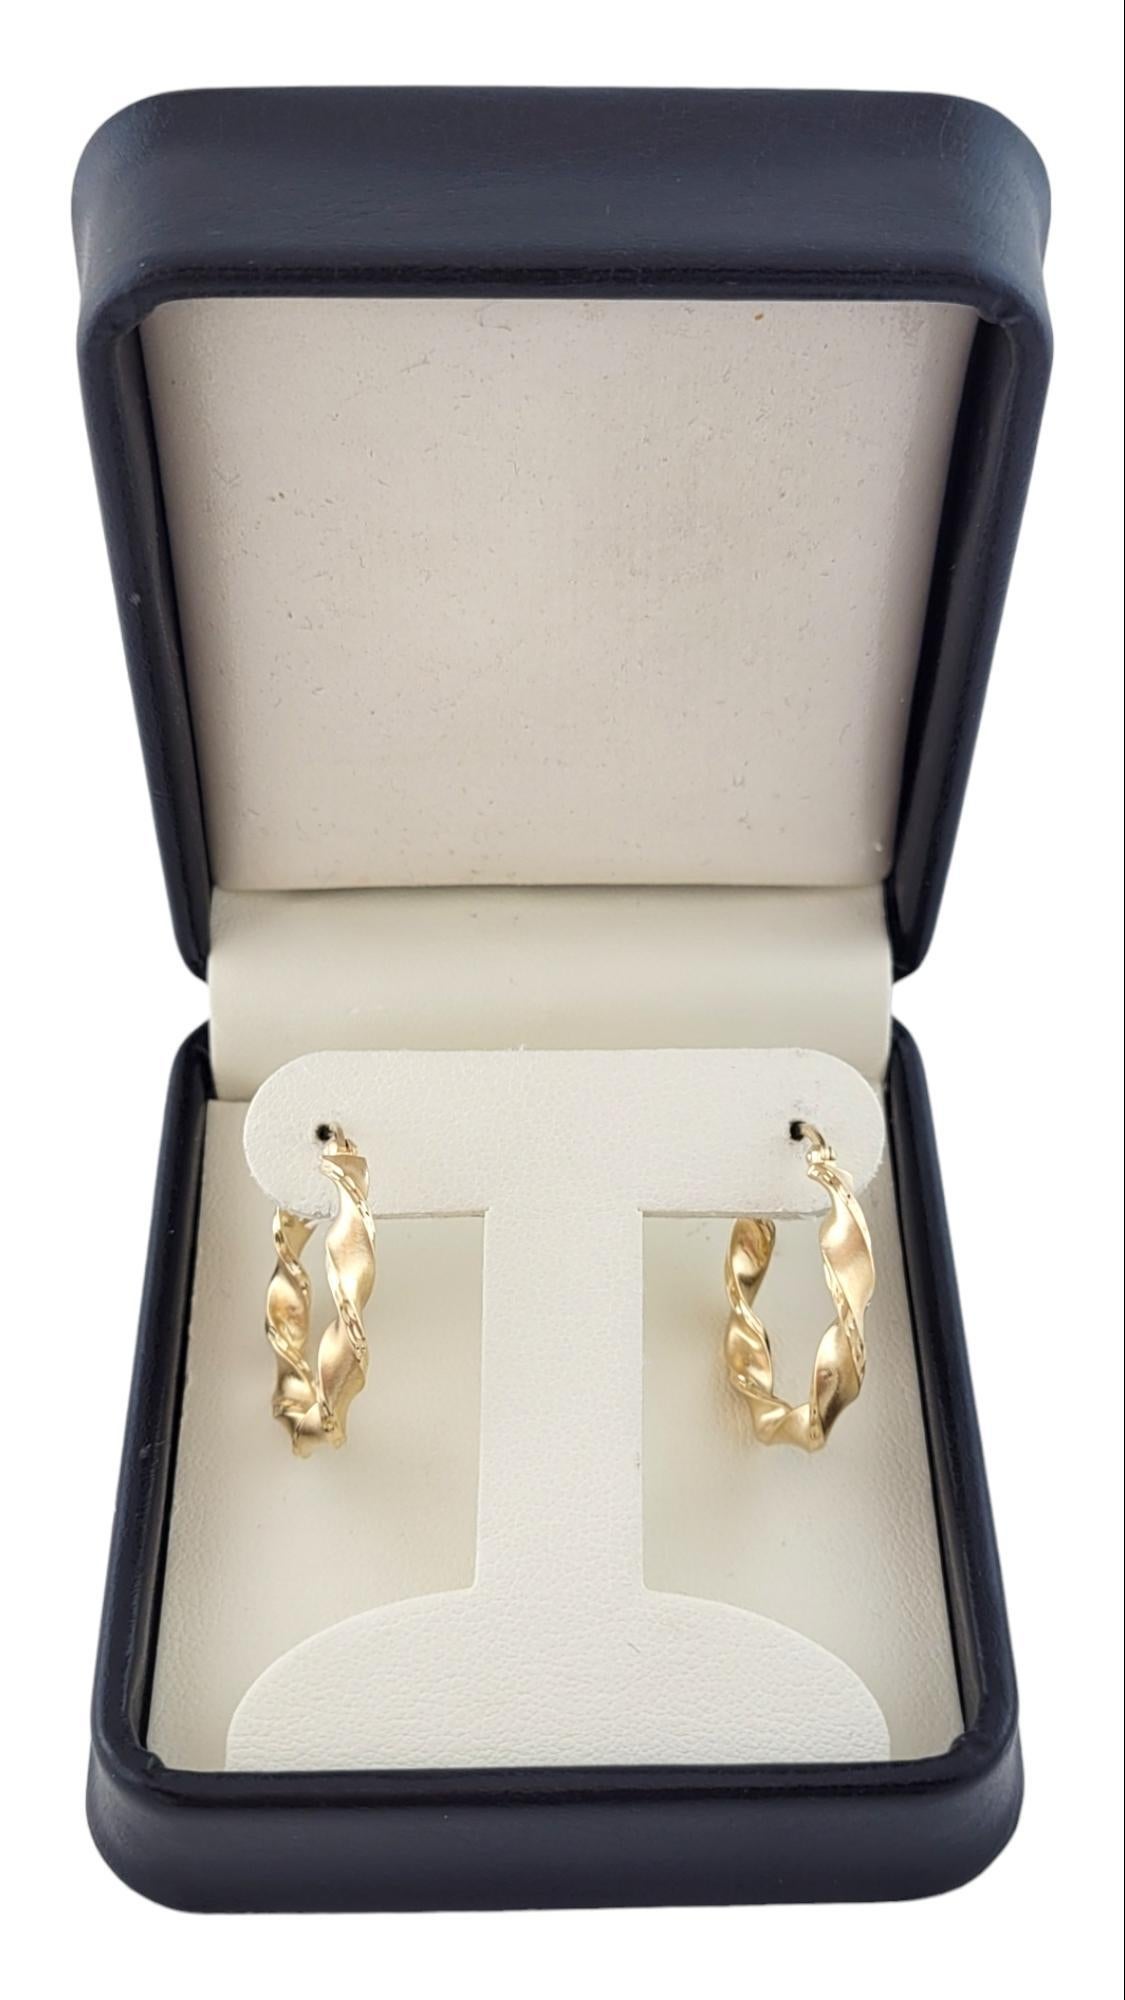 14K Yellow Gold Twisted Hoop Earrings #15900 For Sale 2